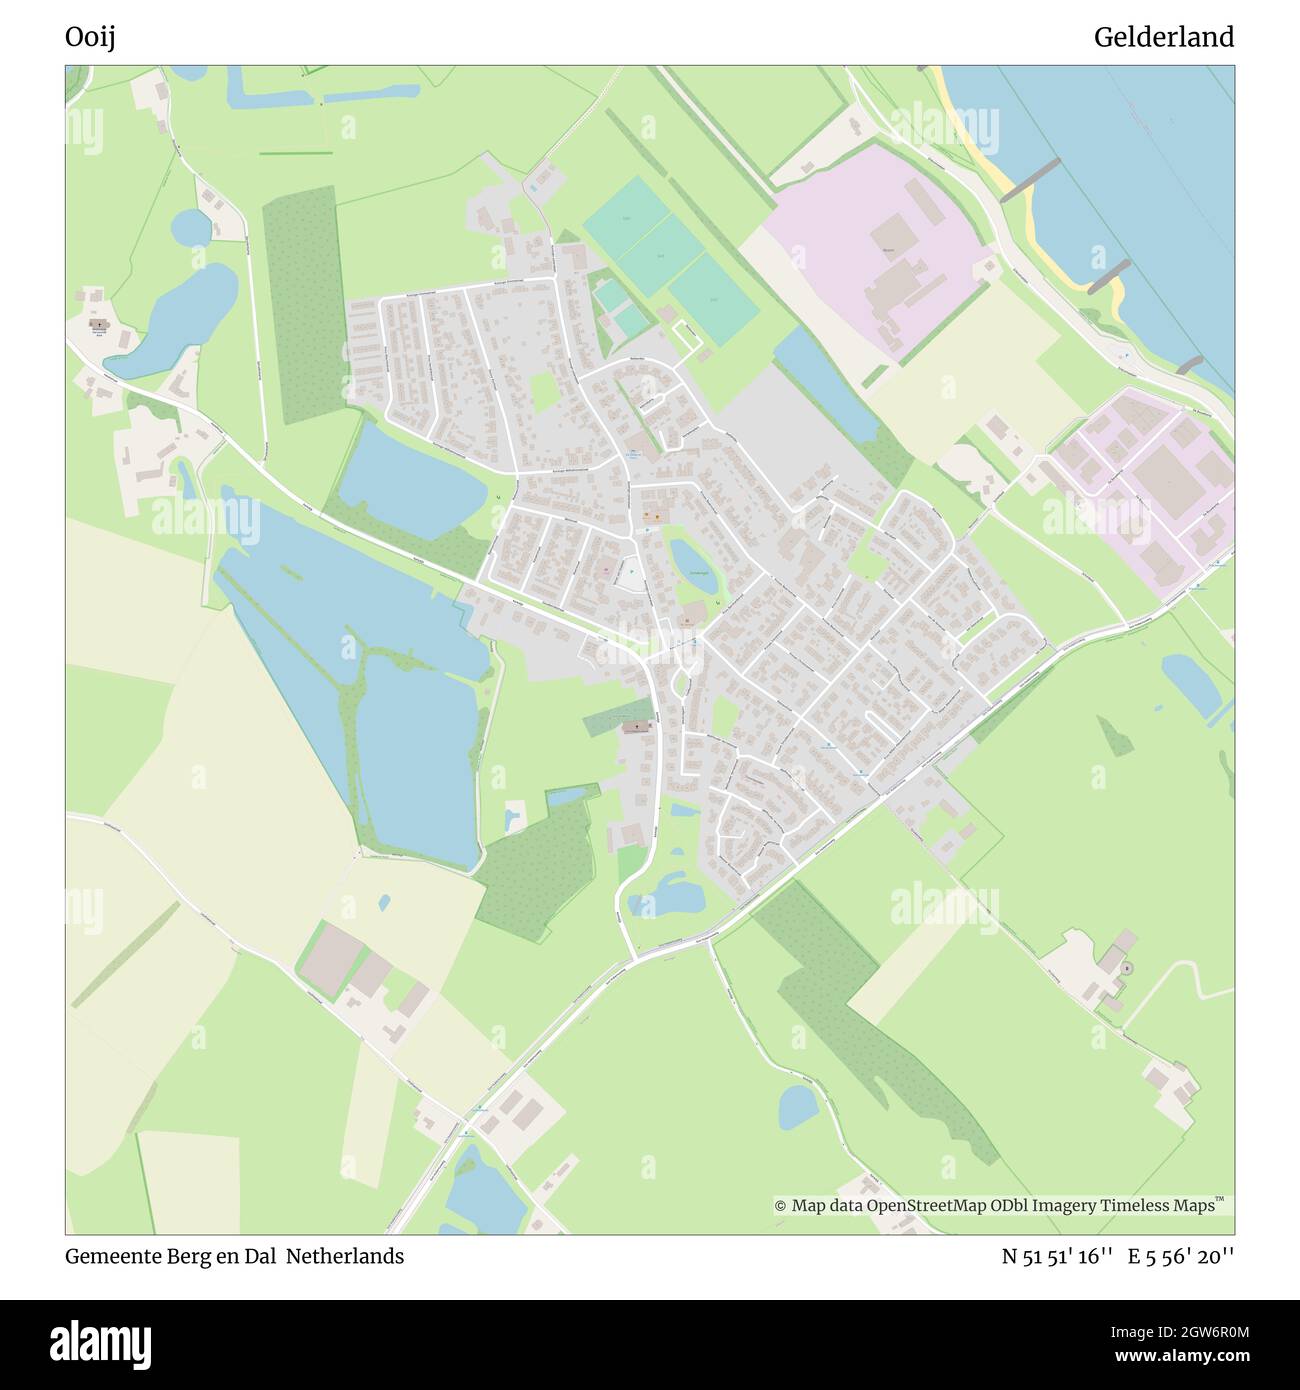 Ooij, Gemeente Berg en Dal, Netherlands, Gelderland, N 51 51' 16'', E 5 56' 20'', map, Timeless Map published in 2021. Travelers, explorers and adventurers like Florence Nightingale, David Livingstone, Ernest Shackleton, Lewis and Clark and Sherlock Holmes relied on maps to plan travels to the world's most remote corners, Timeless Maps is mapping most locations on the globe, showing the achievement of great dreams Stock Photo